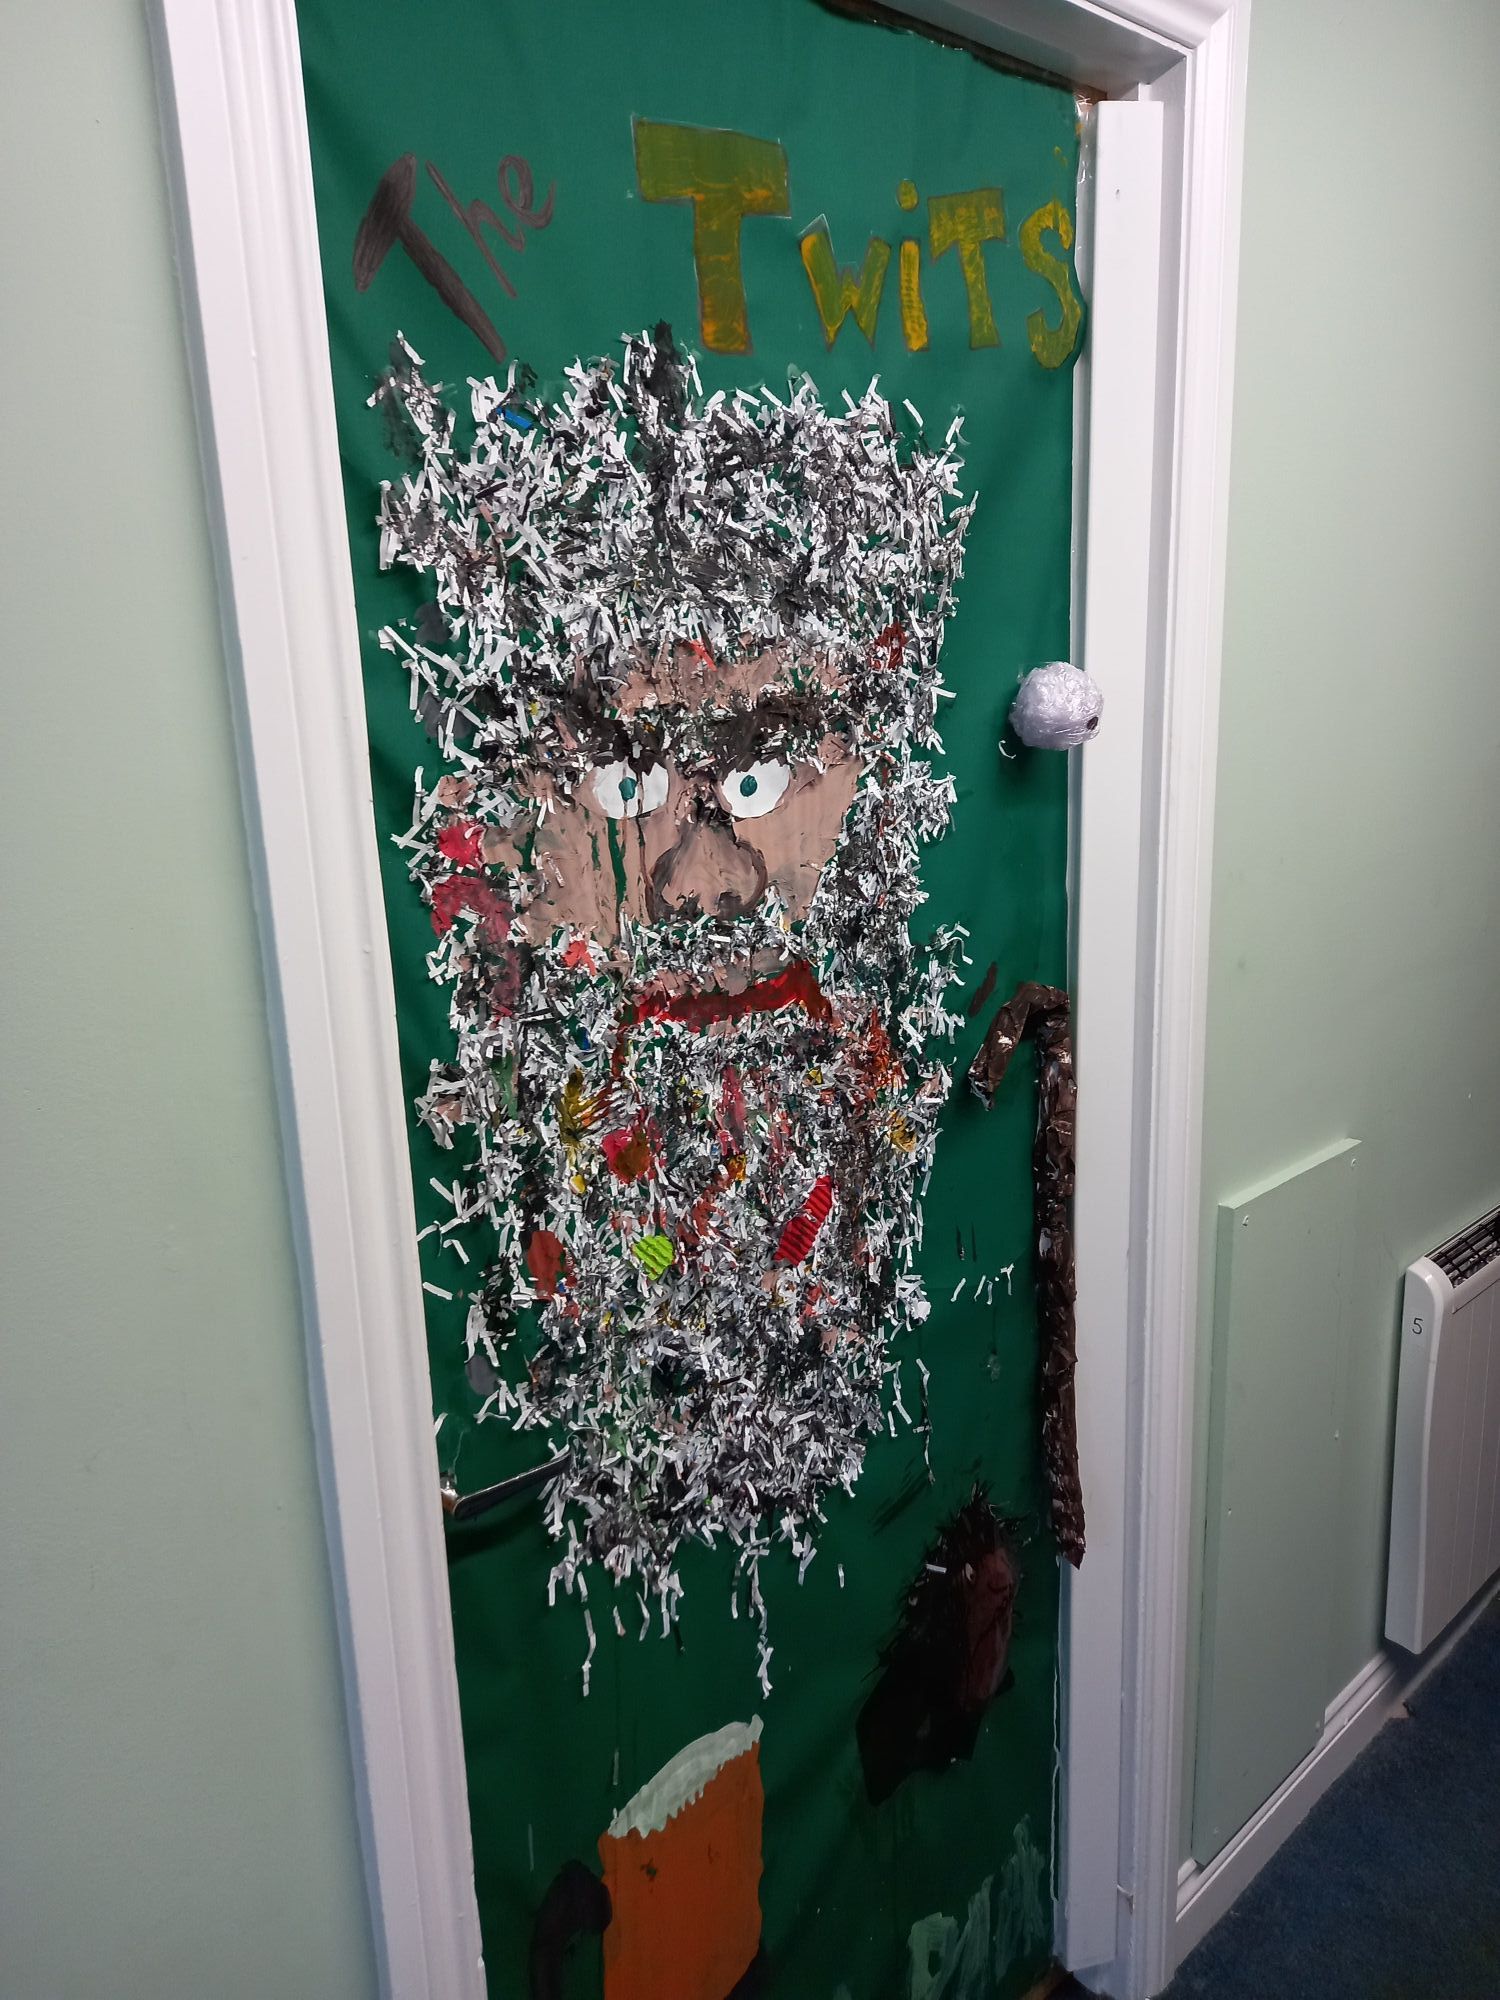 World Book Day - doors decorated by students